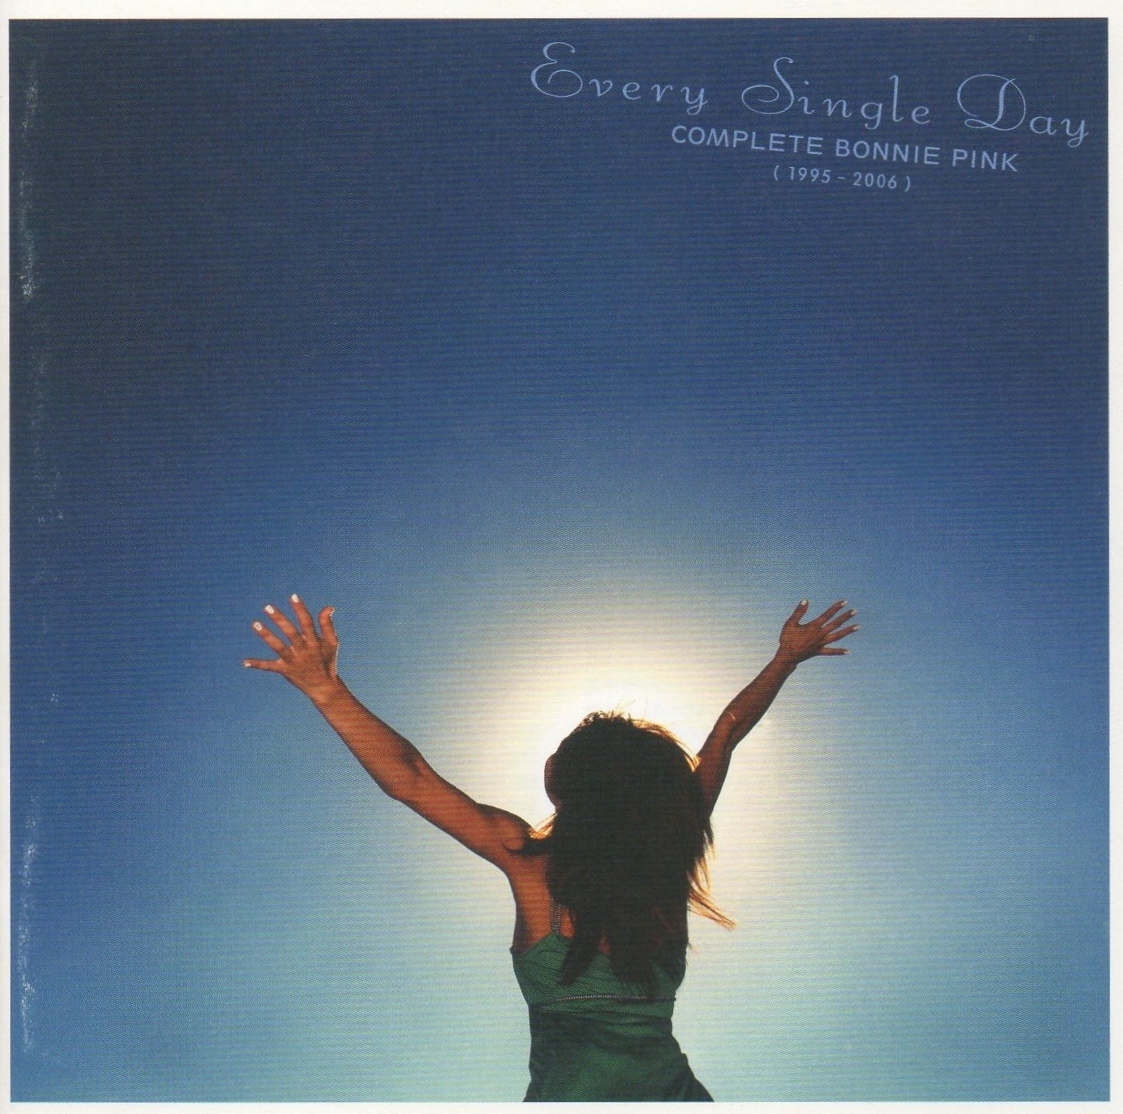 BONNIE PINK / Every Single Day -COMPLETE BONNIE PINK(1995-2006)- / 2006.07.26 / ベストアルバム / 通常盤 / 2CD / WPCL-10320-1_画像1